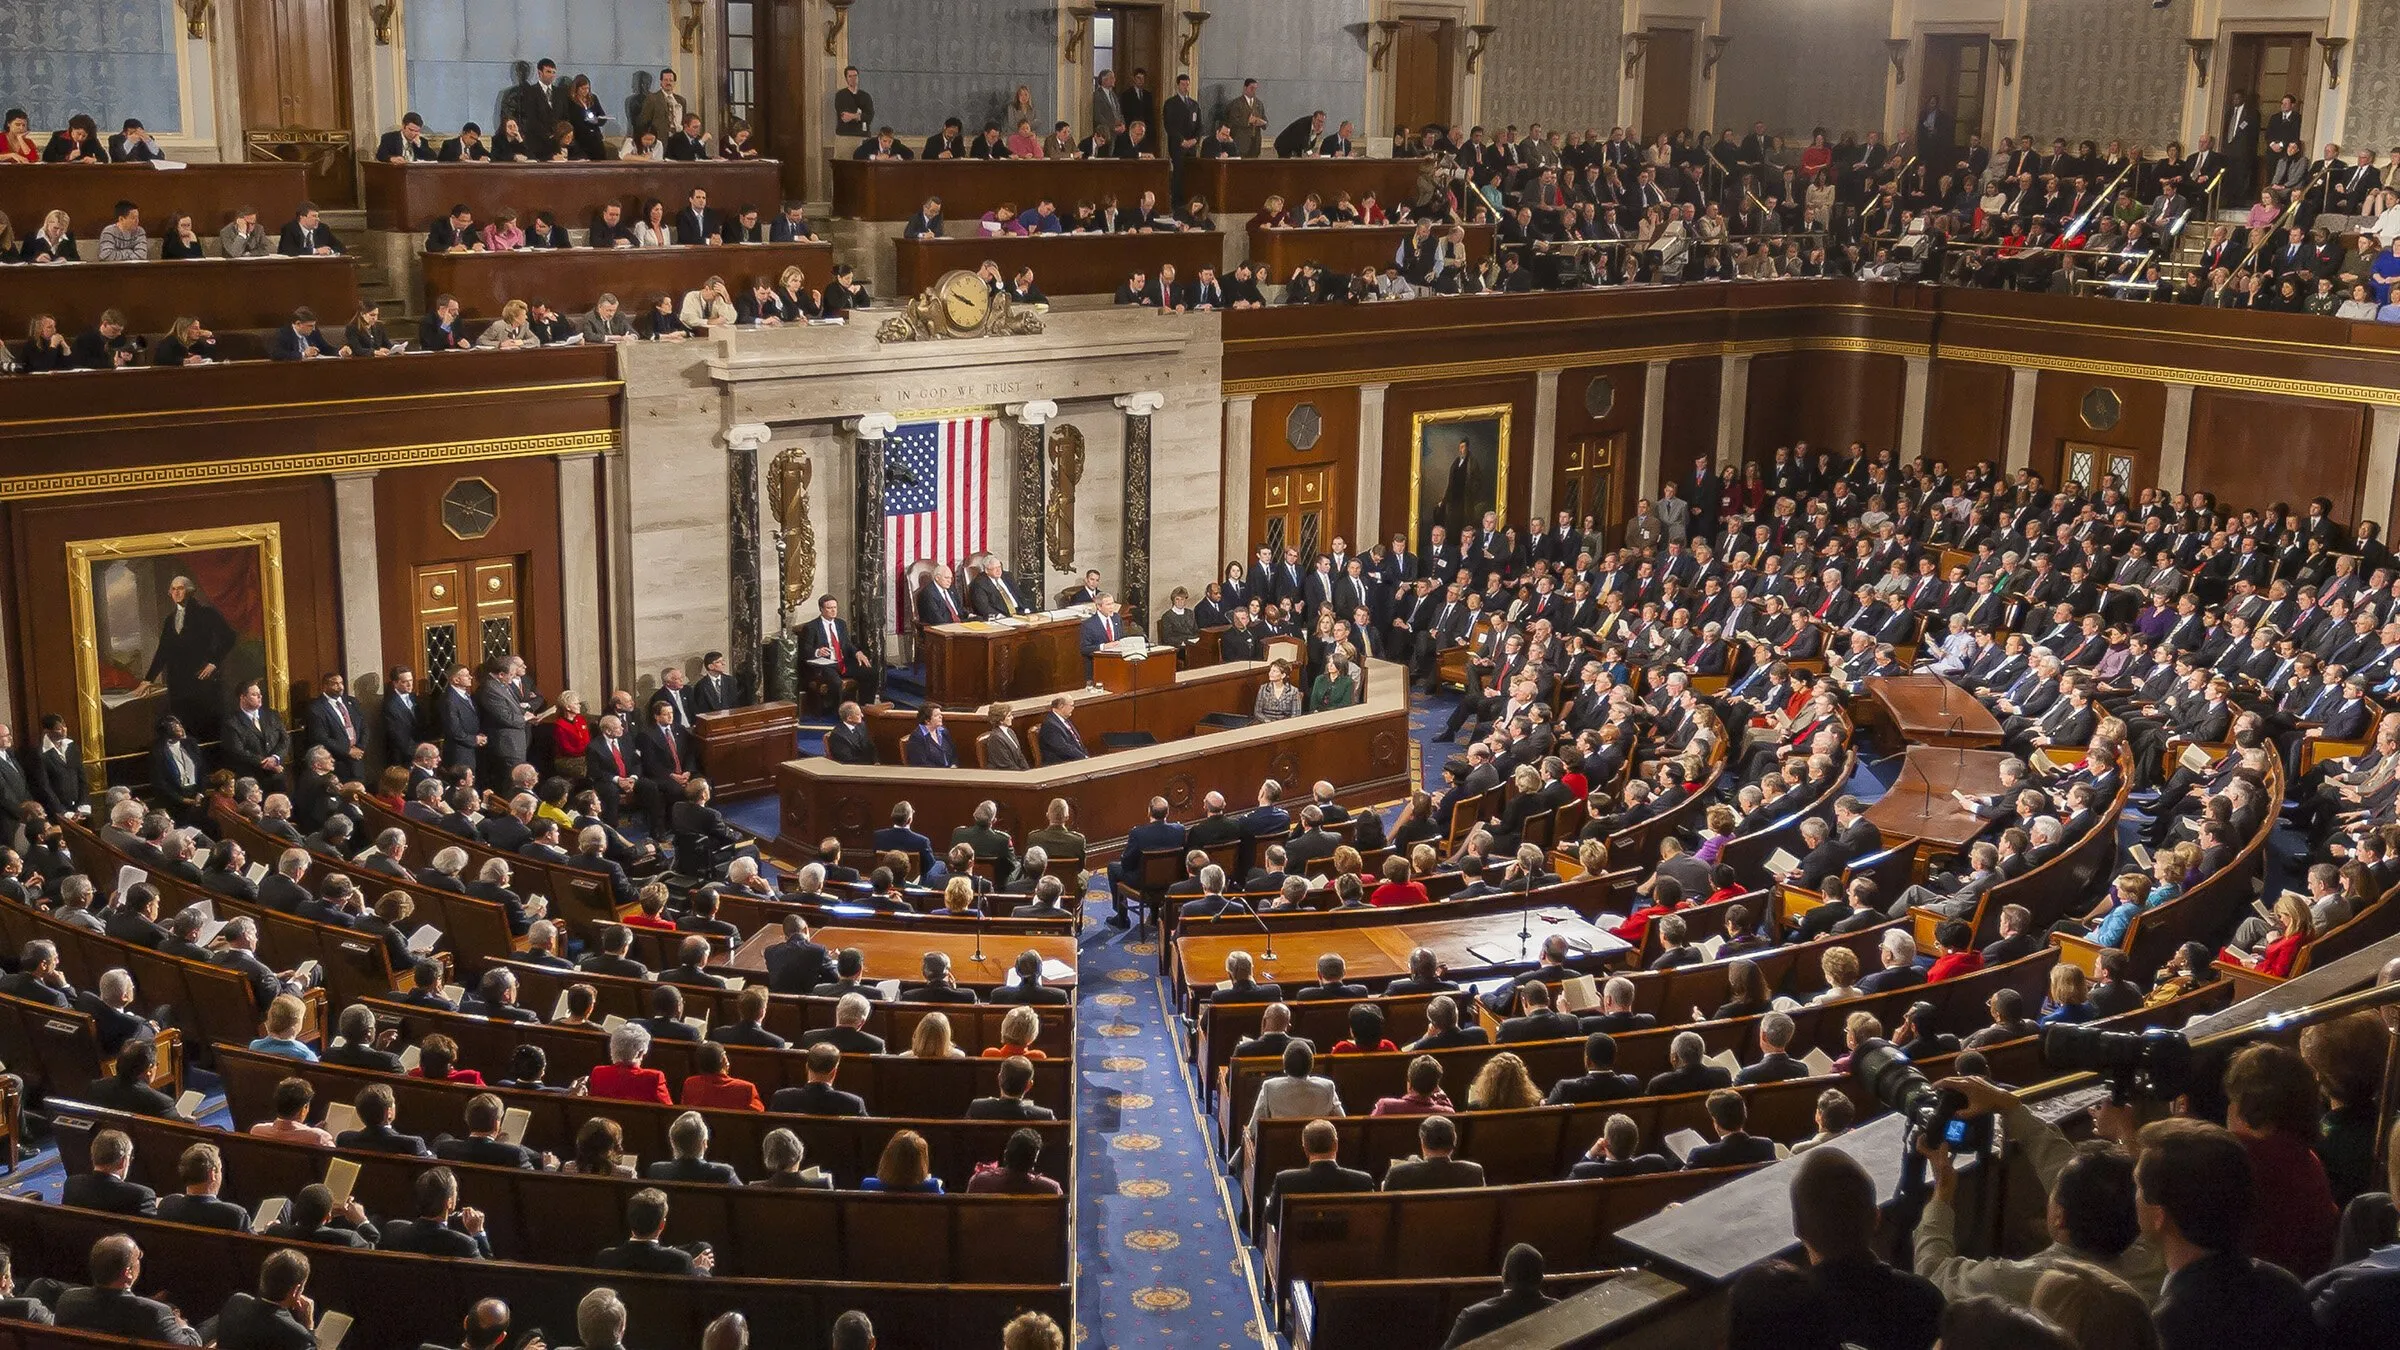 A joint session of Congress in the U.S. House. Image: Rob Crandall/Shutterstock